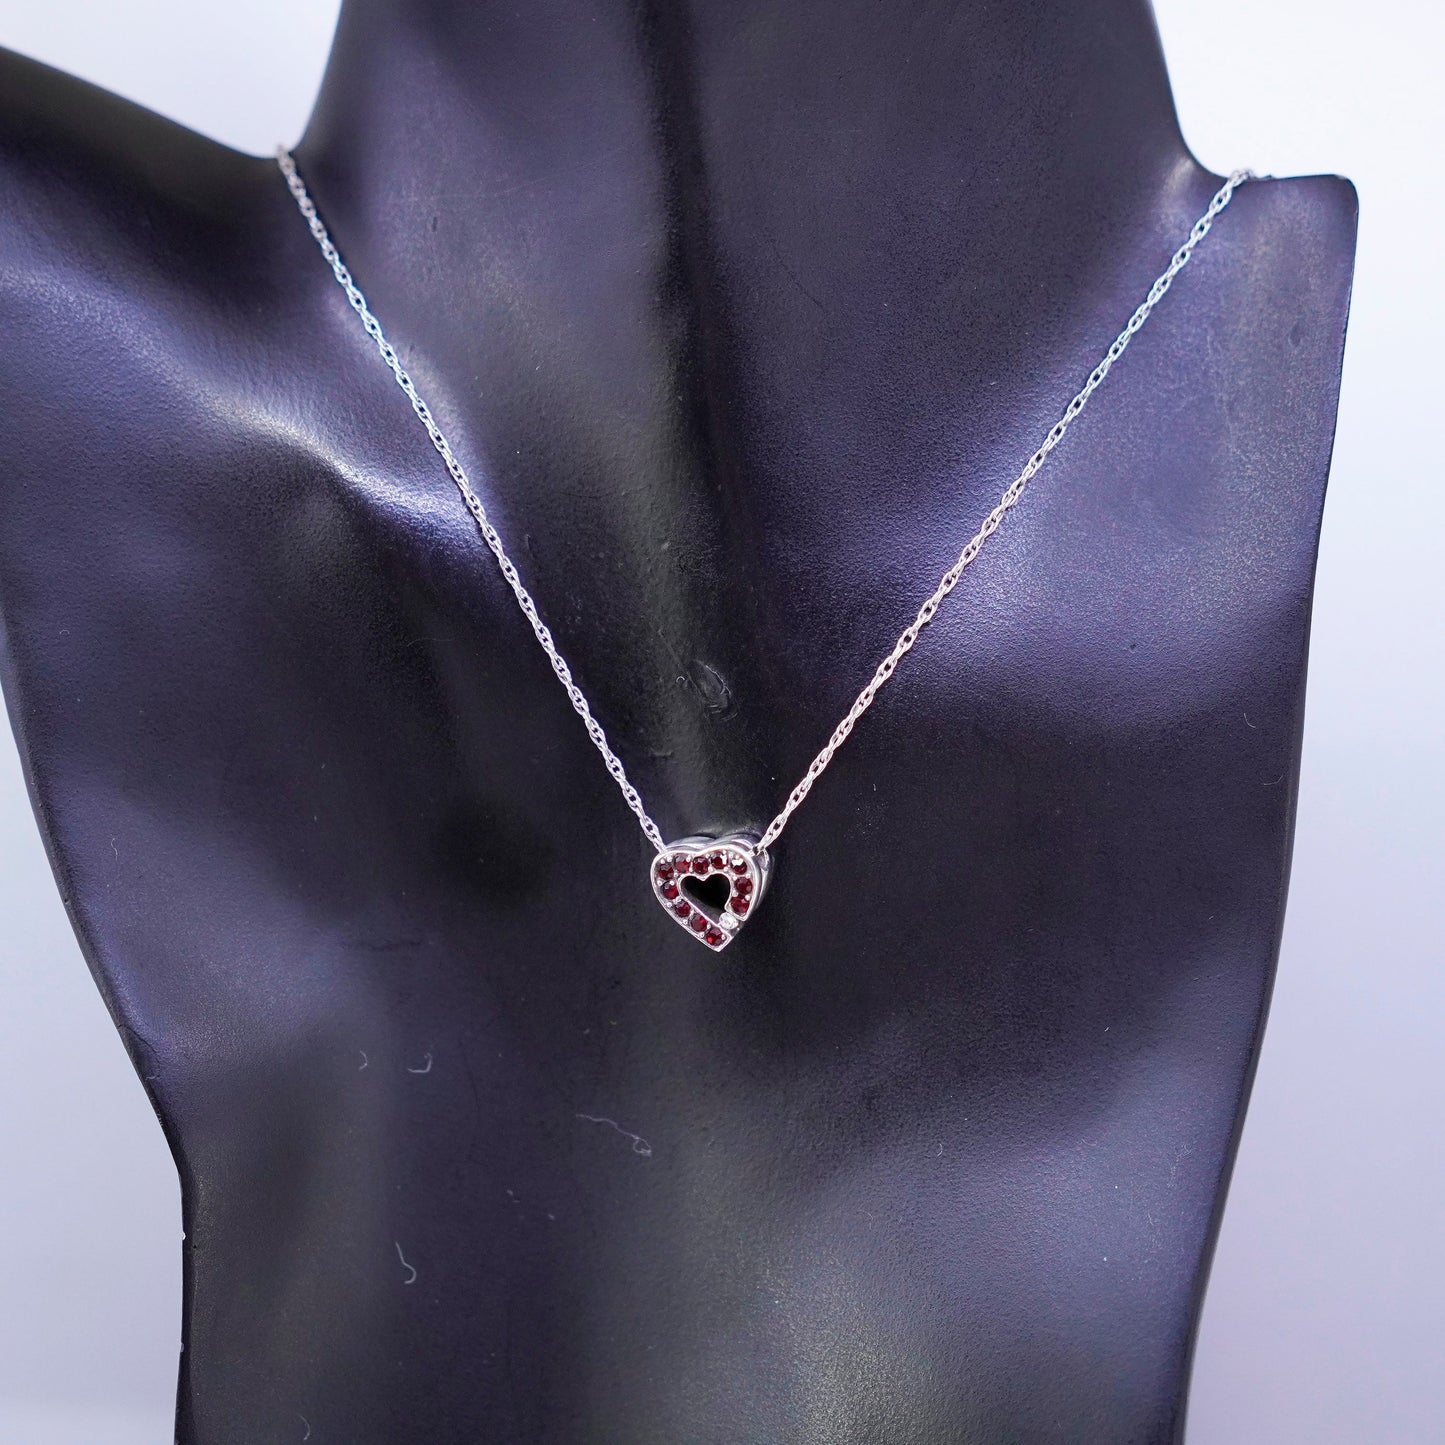 16”, Sterling 925 silver Singapore rope necklace with ruby cz heart pendant